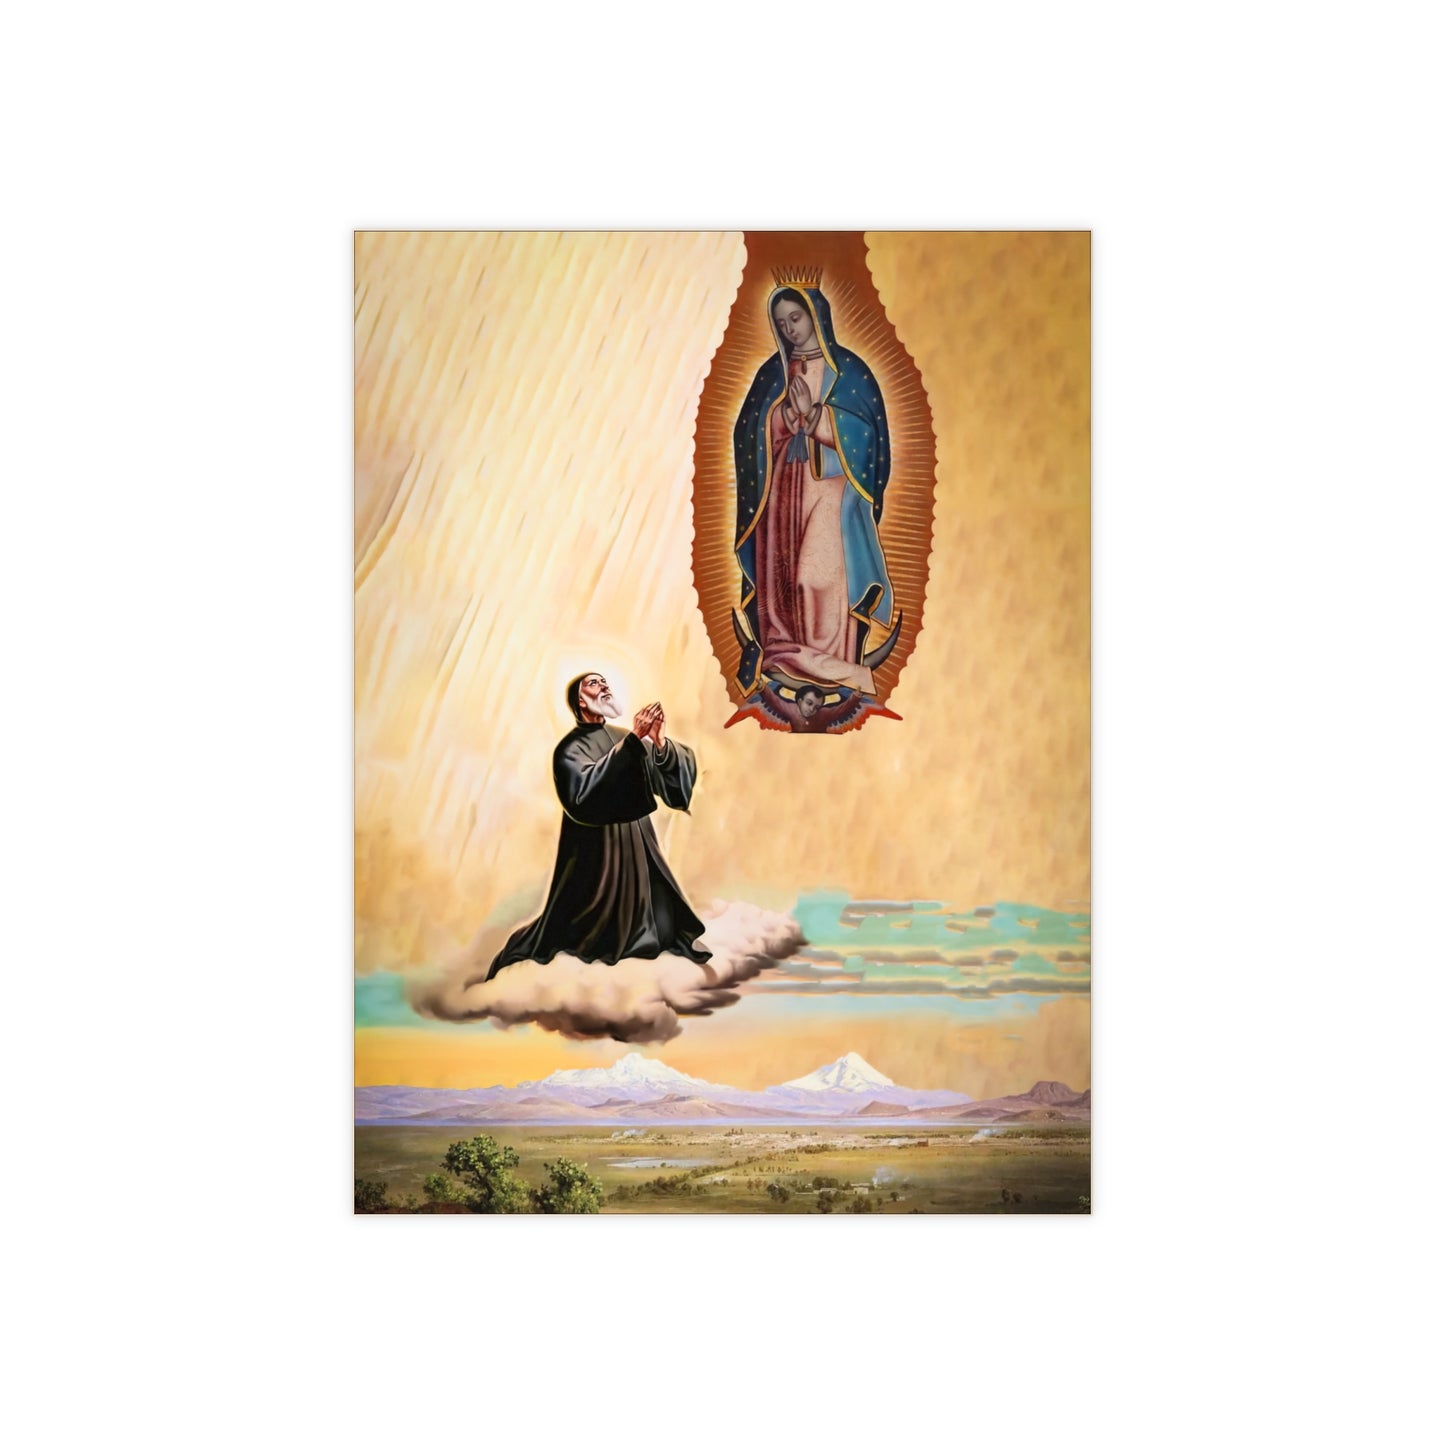 San Chárbel, Hermano, ya eres Mexicano - Ceramic Photo Icon with Our Lady of Guadalupe pray for Mexico Size 6"x8"